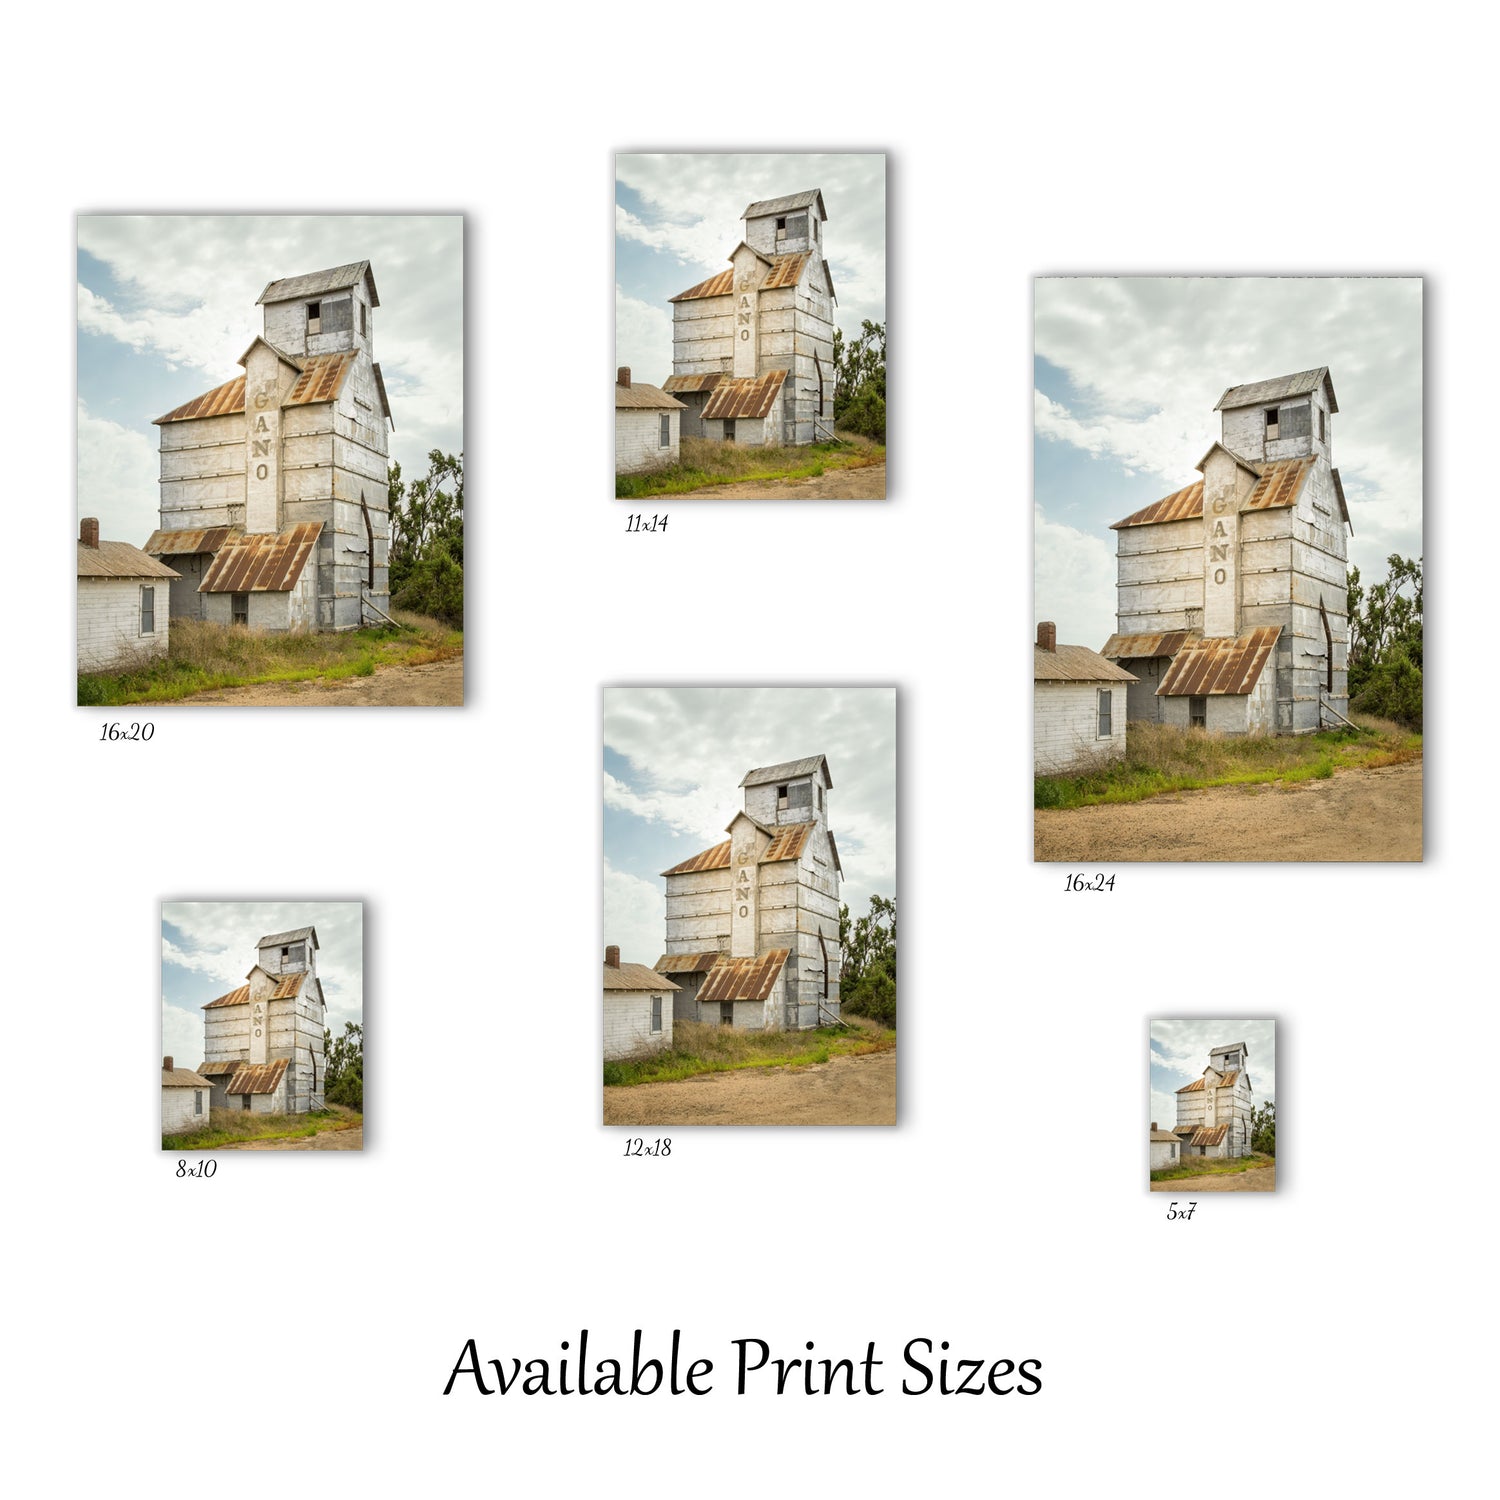 Visual representation of wall art print sizes available: 5x7, 8x10, 11x14, 12x18, 16x20, and 16x24.